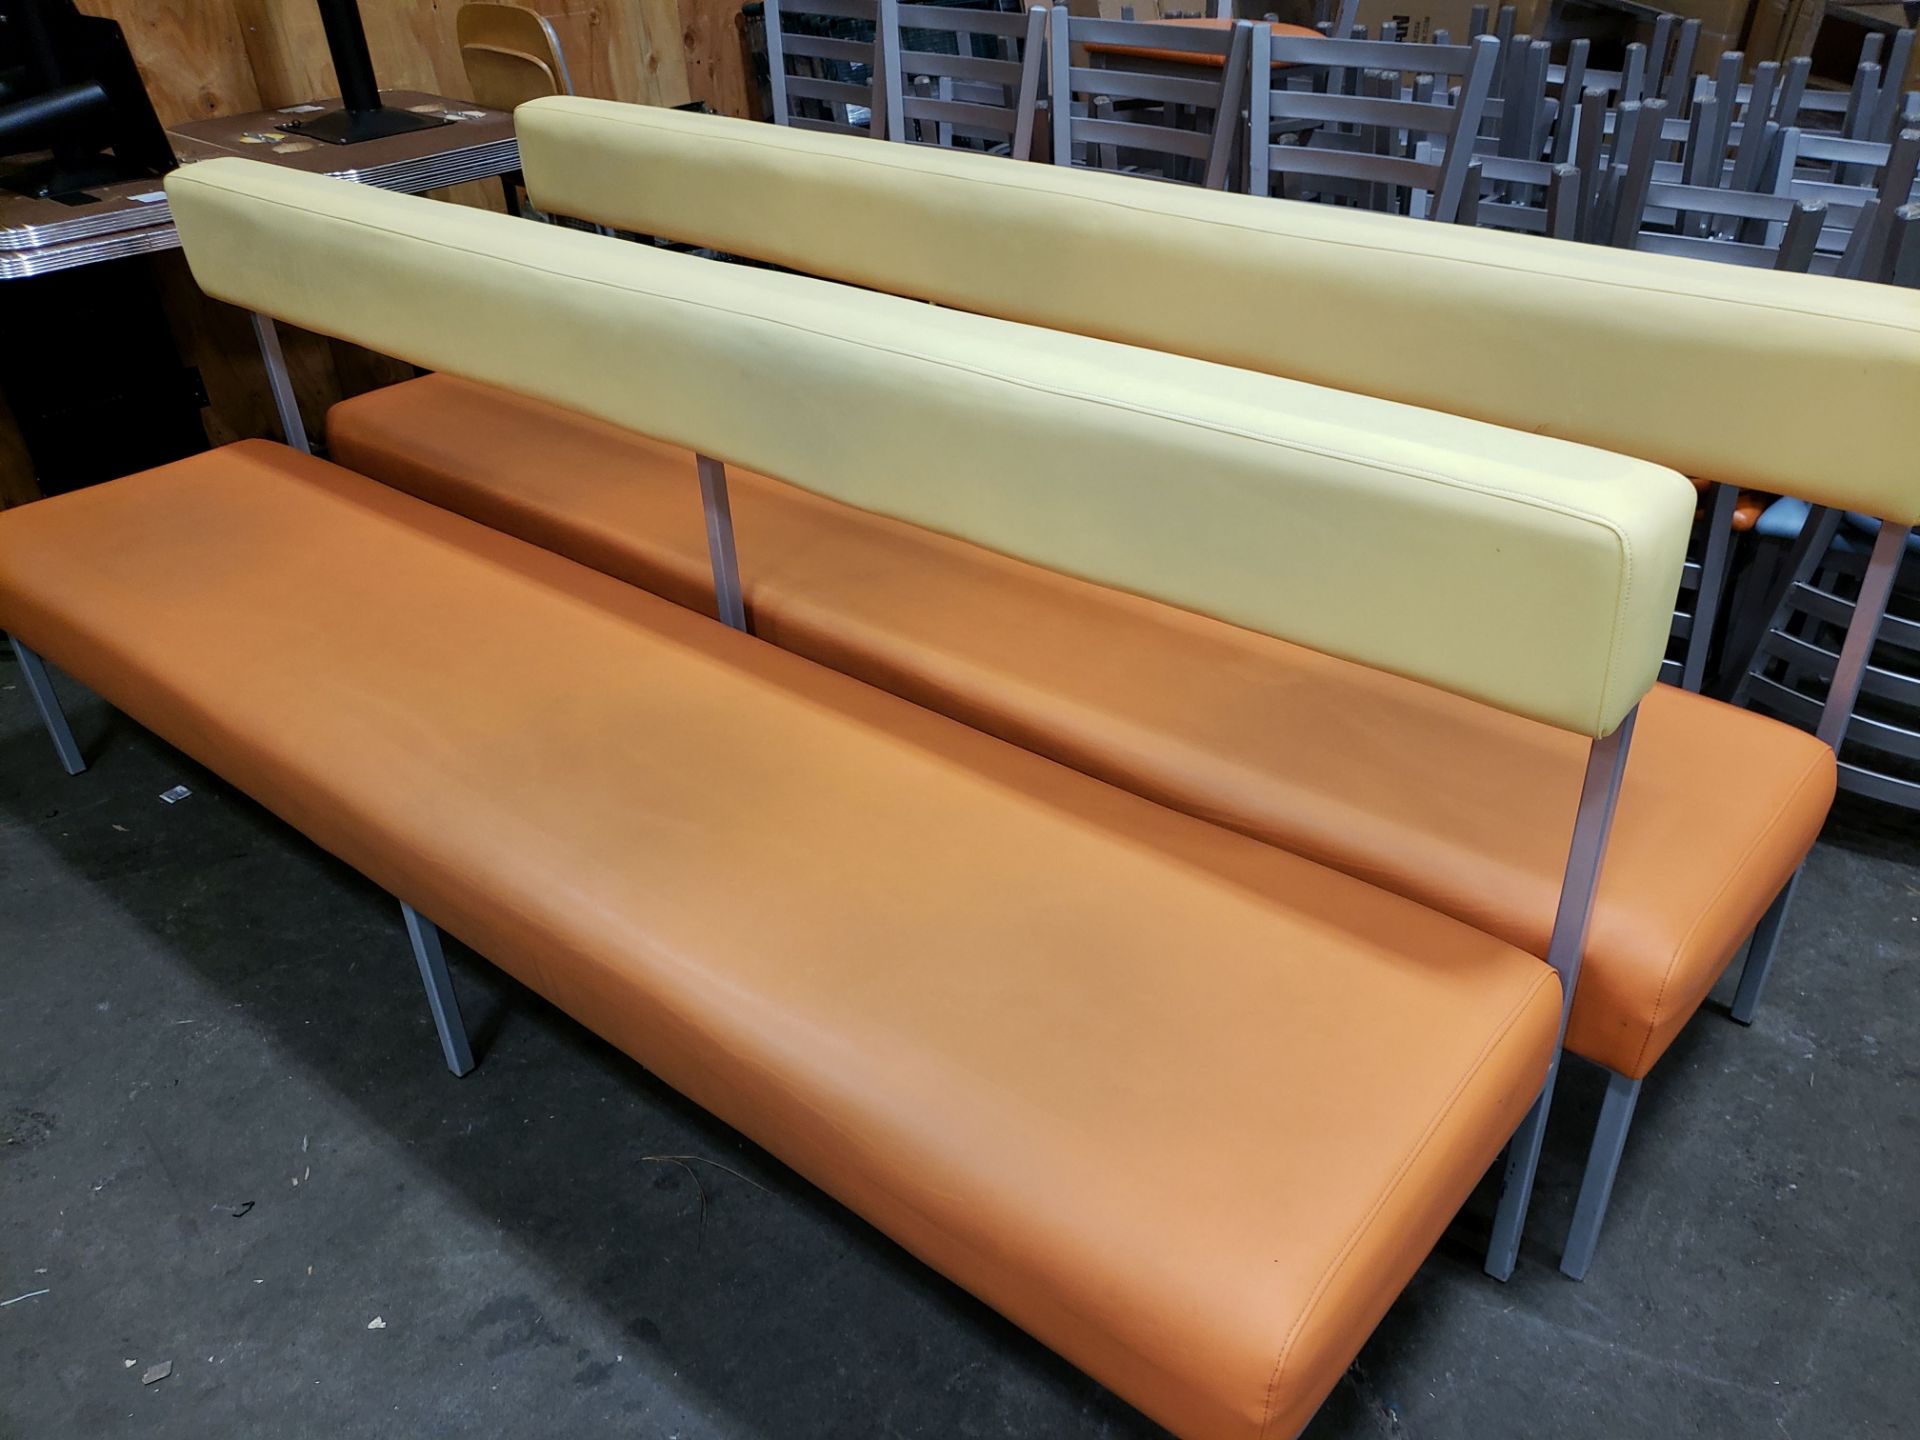 Metal Frame Bench Seating with Padded Seat & Back - 97" Long - Lot of 2 - Image 3 of 4